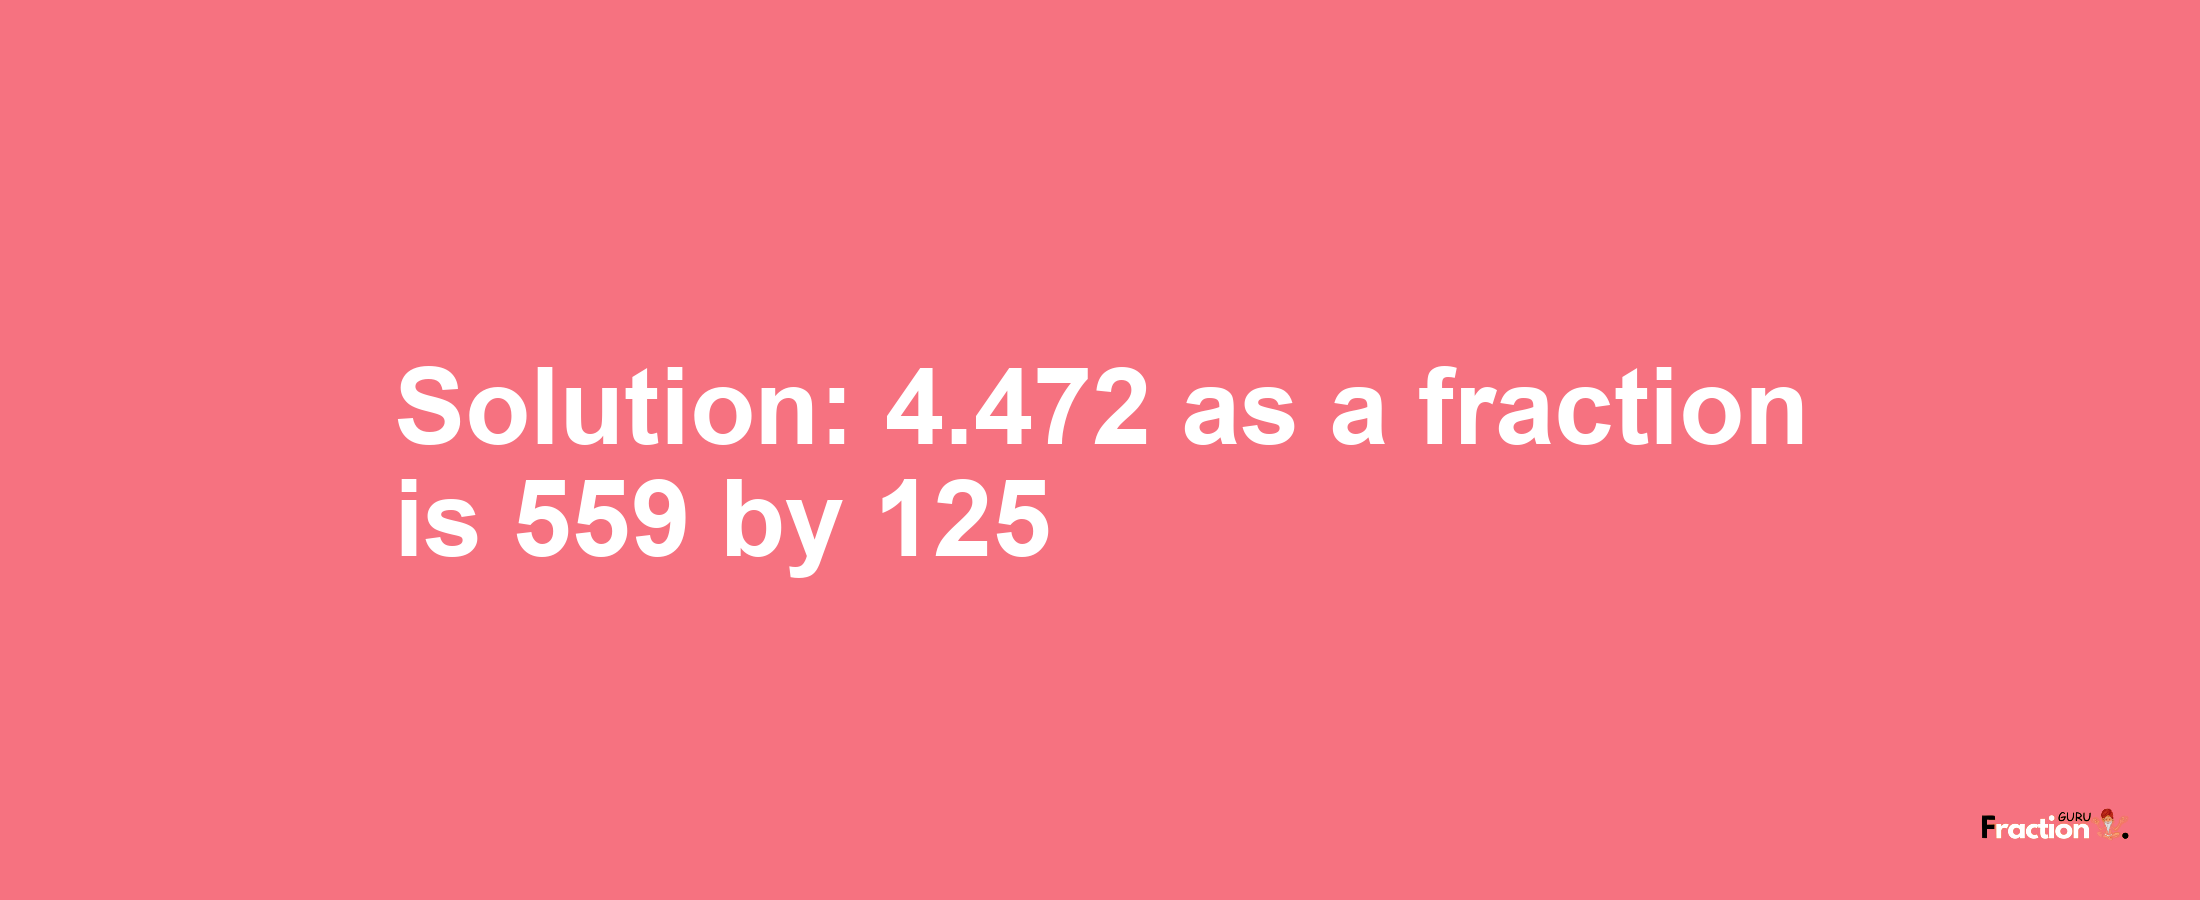 Solution:4.472 as a fraction is 559/125